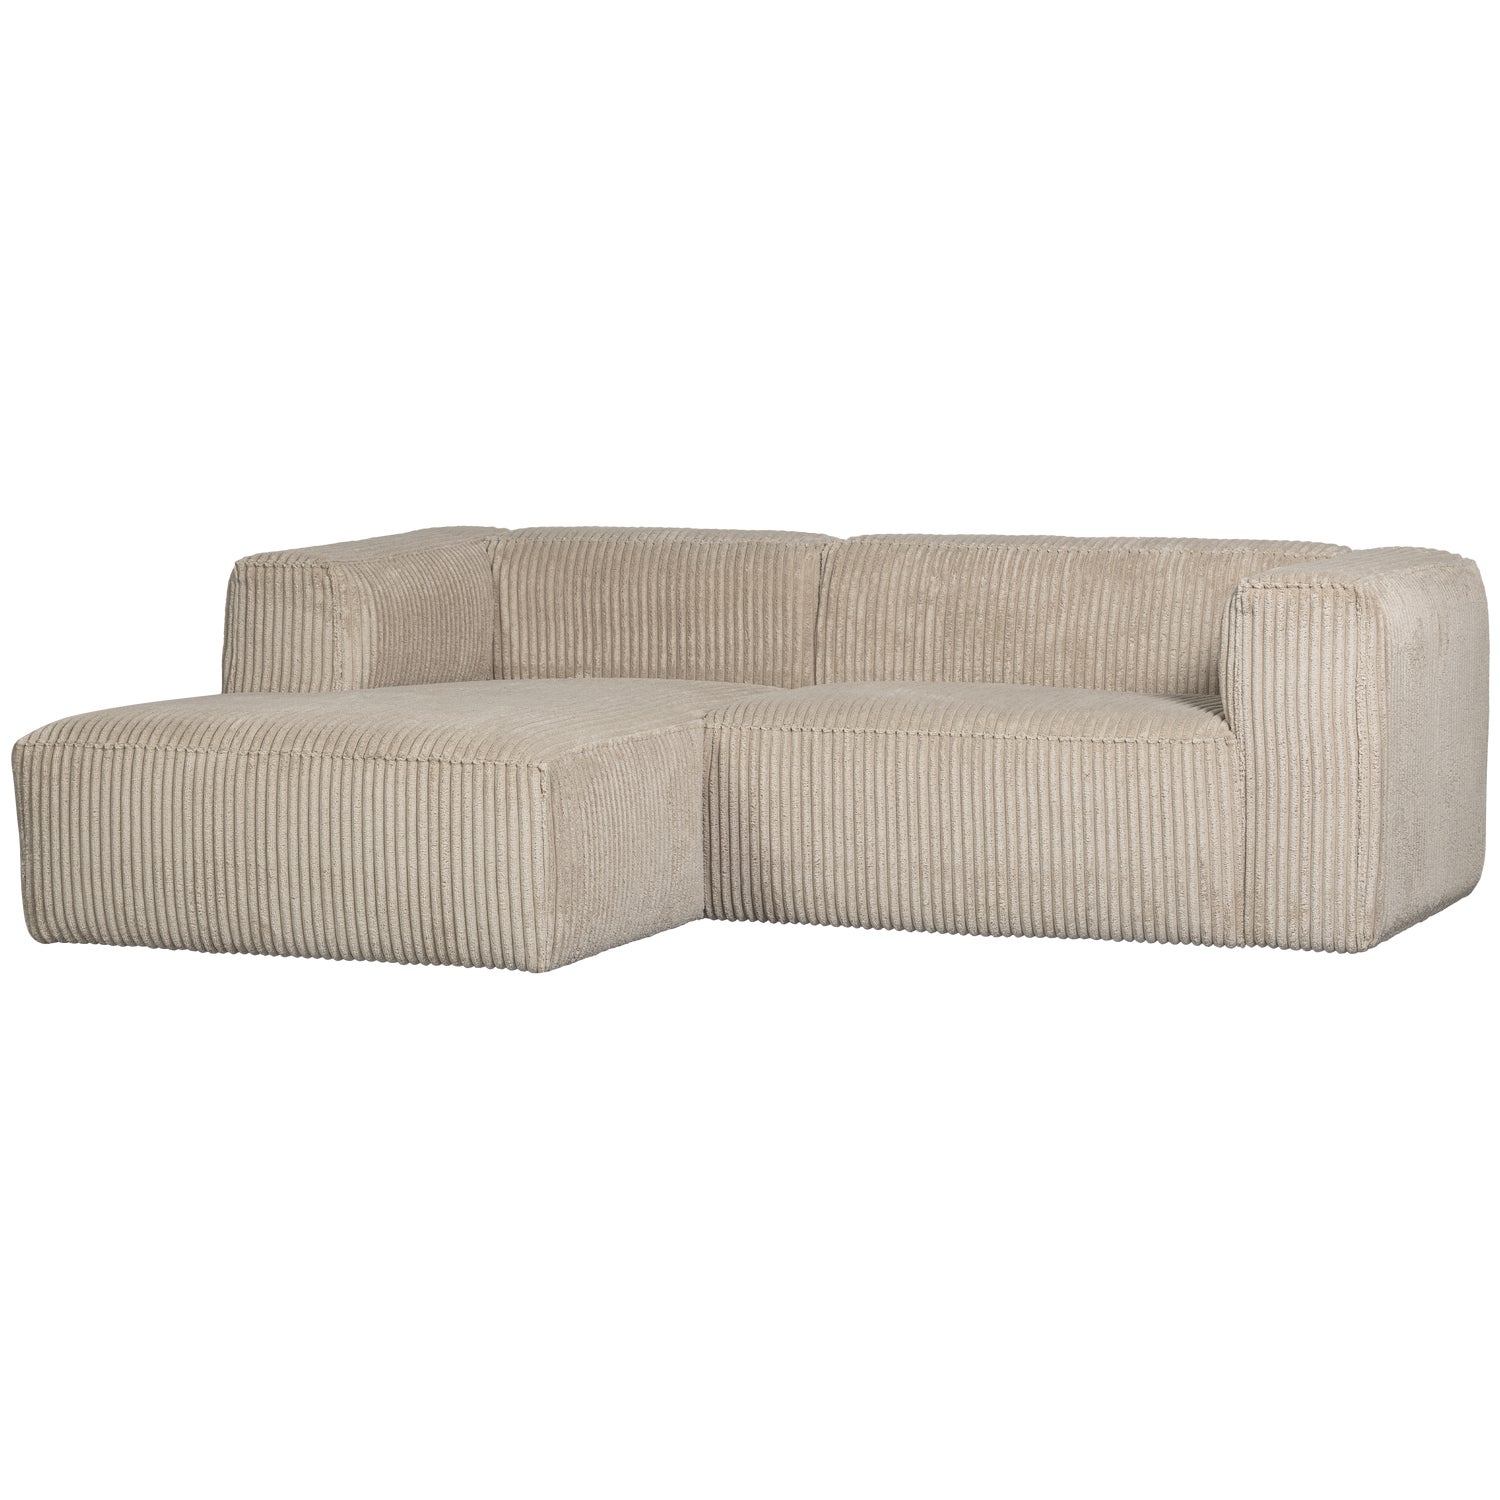 377432-RR-02_VS_WE_Bean_chaise_longue_links_grove_ribstof_travertin_SA.png?auto=webp&format=png&width=1500&height=1500